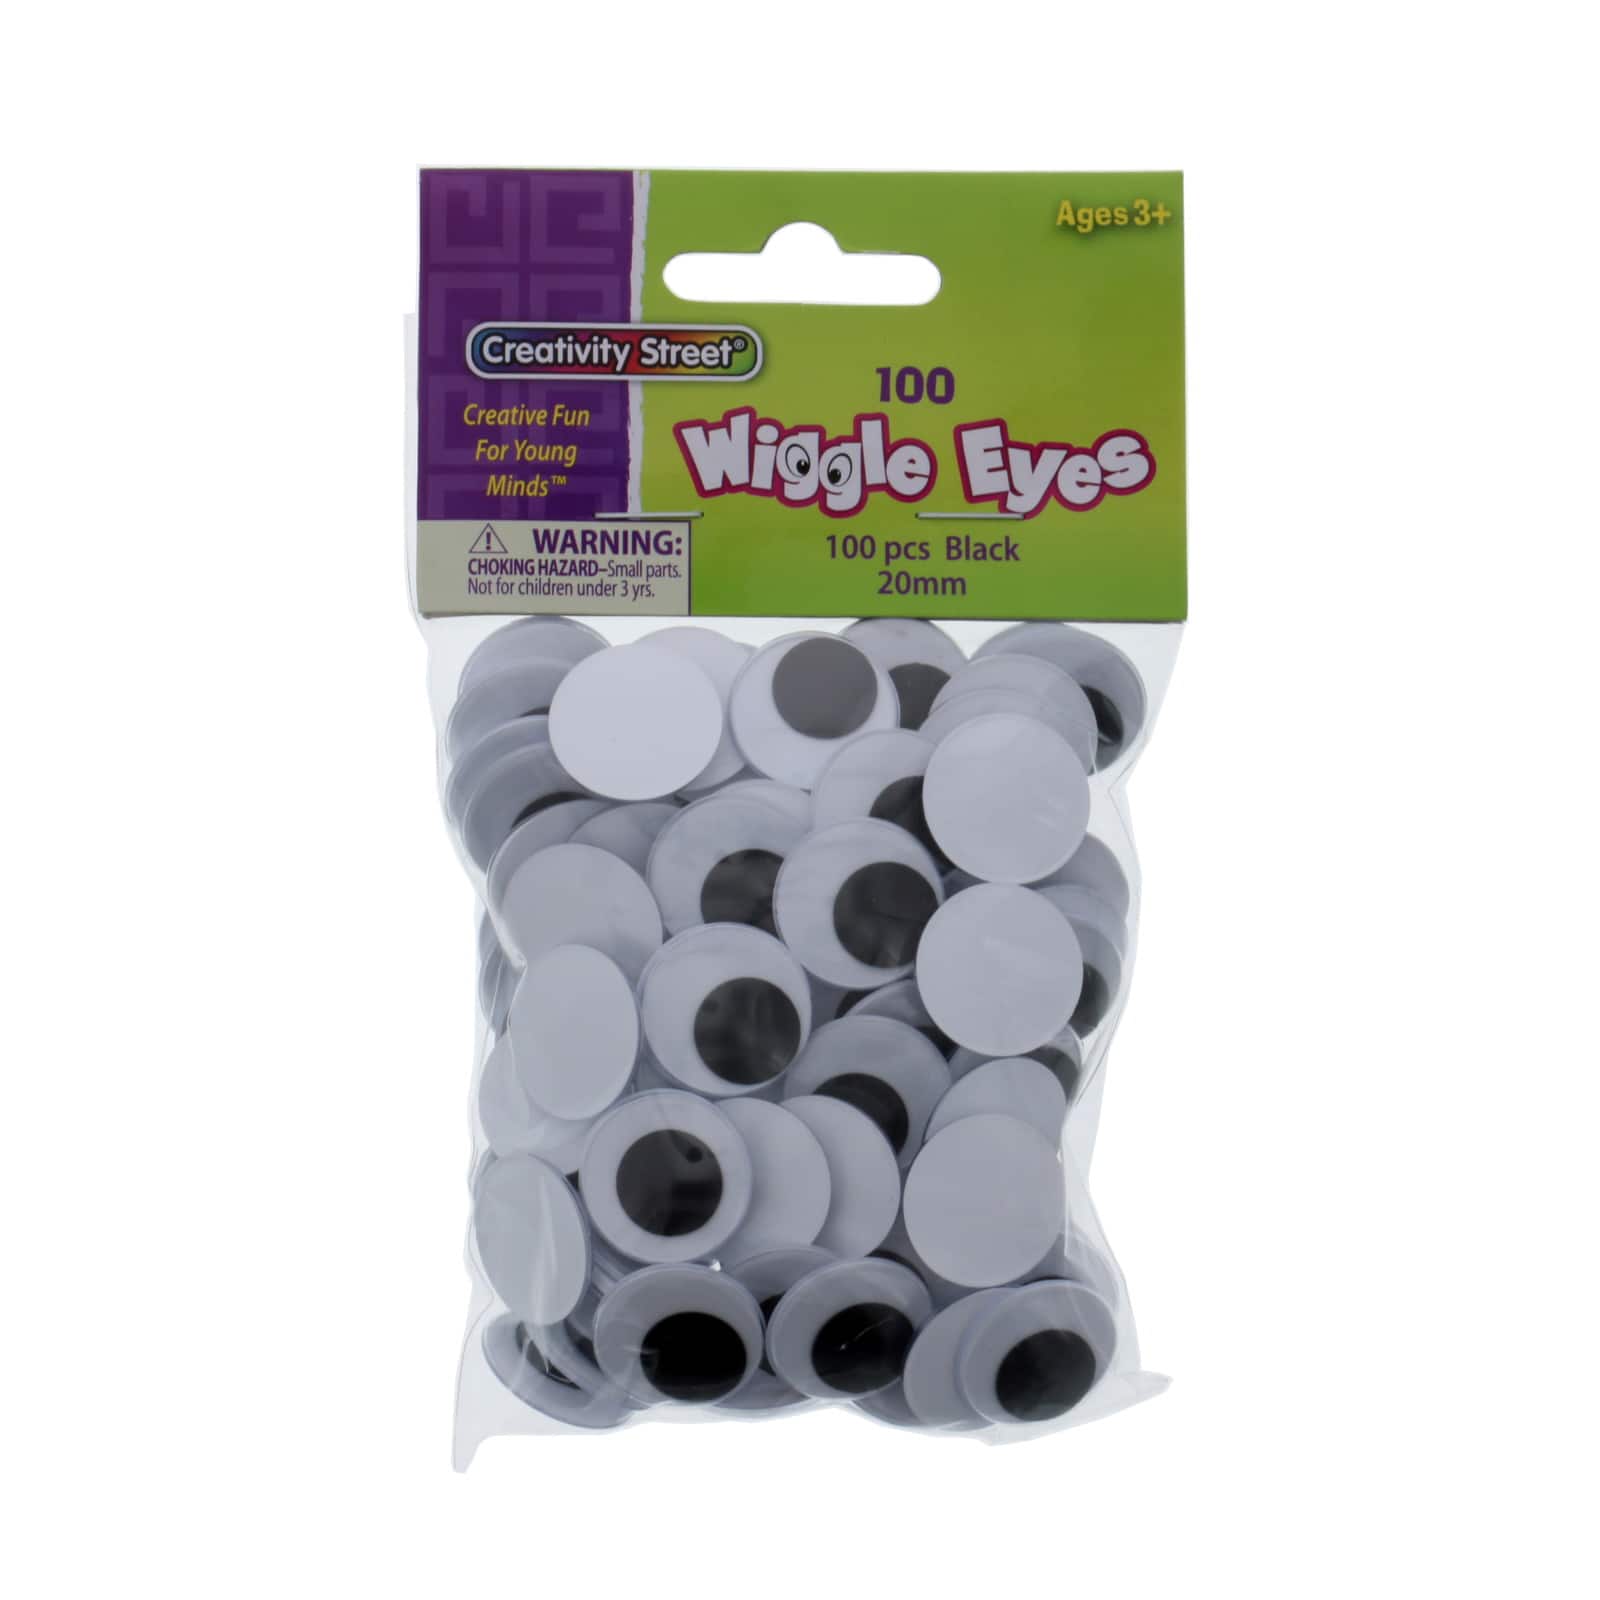 Essentials by Leisure Arts Eyes Sticky Back Moveable 4 2pc Googly Eyes,  Google Eyes for Crafts, Big Googly Eyes for Crafts, Wiggle Eyes, Craft Eyes  